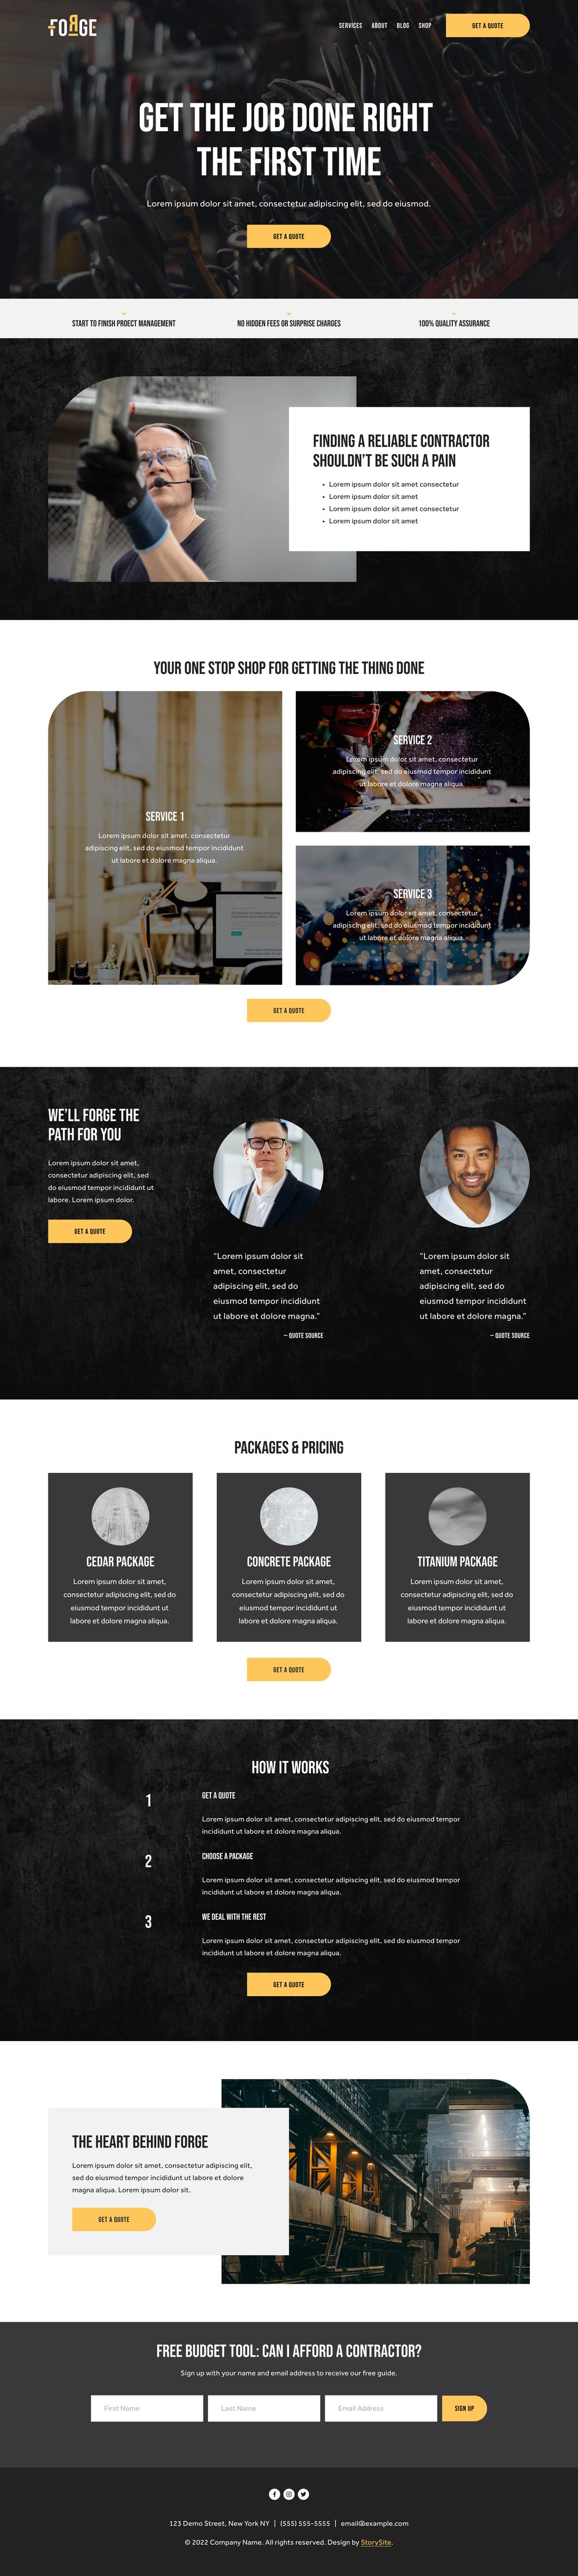 Forge: An Industrial StoryBrand Website Template